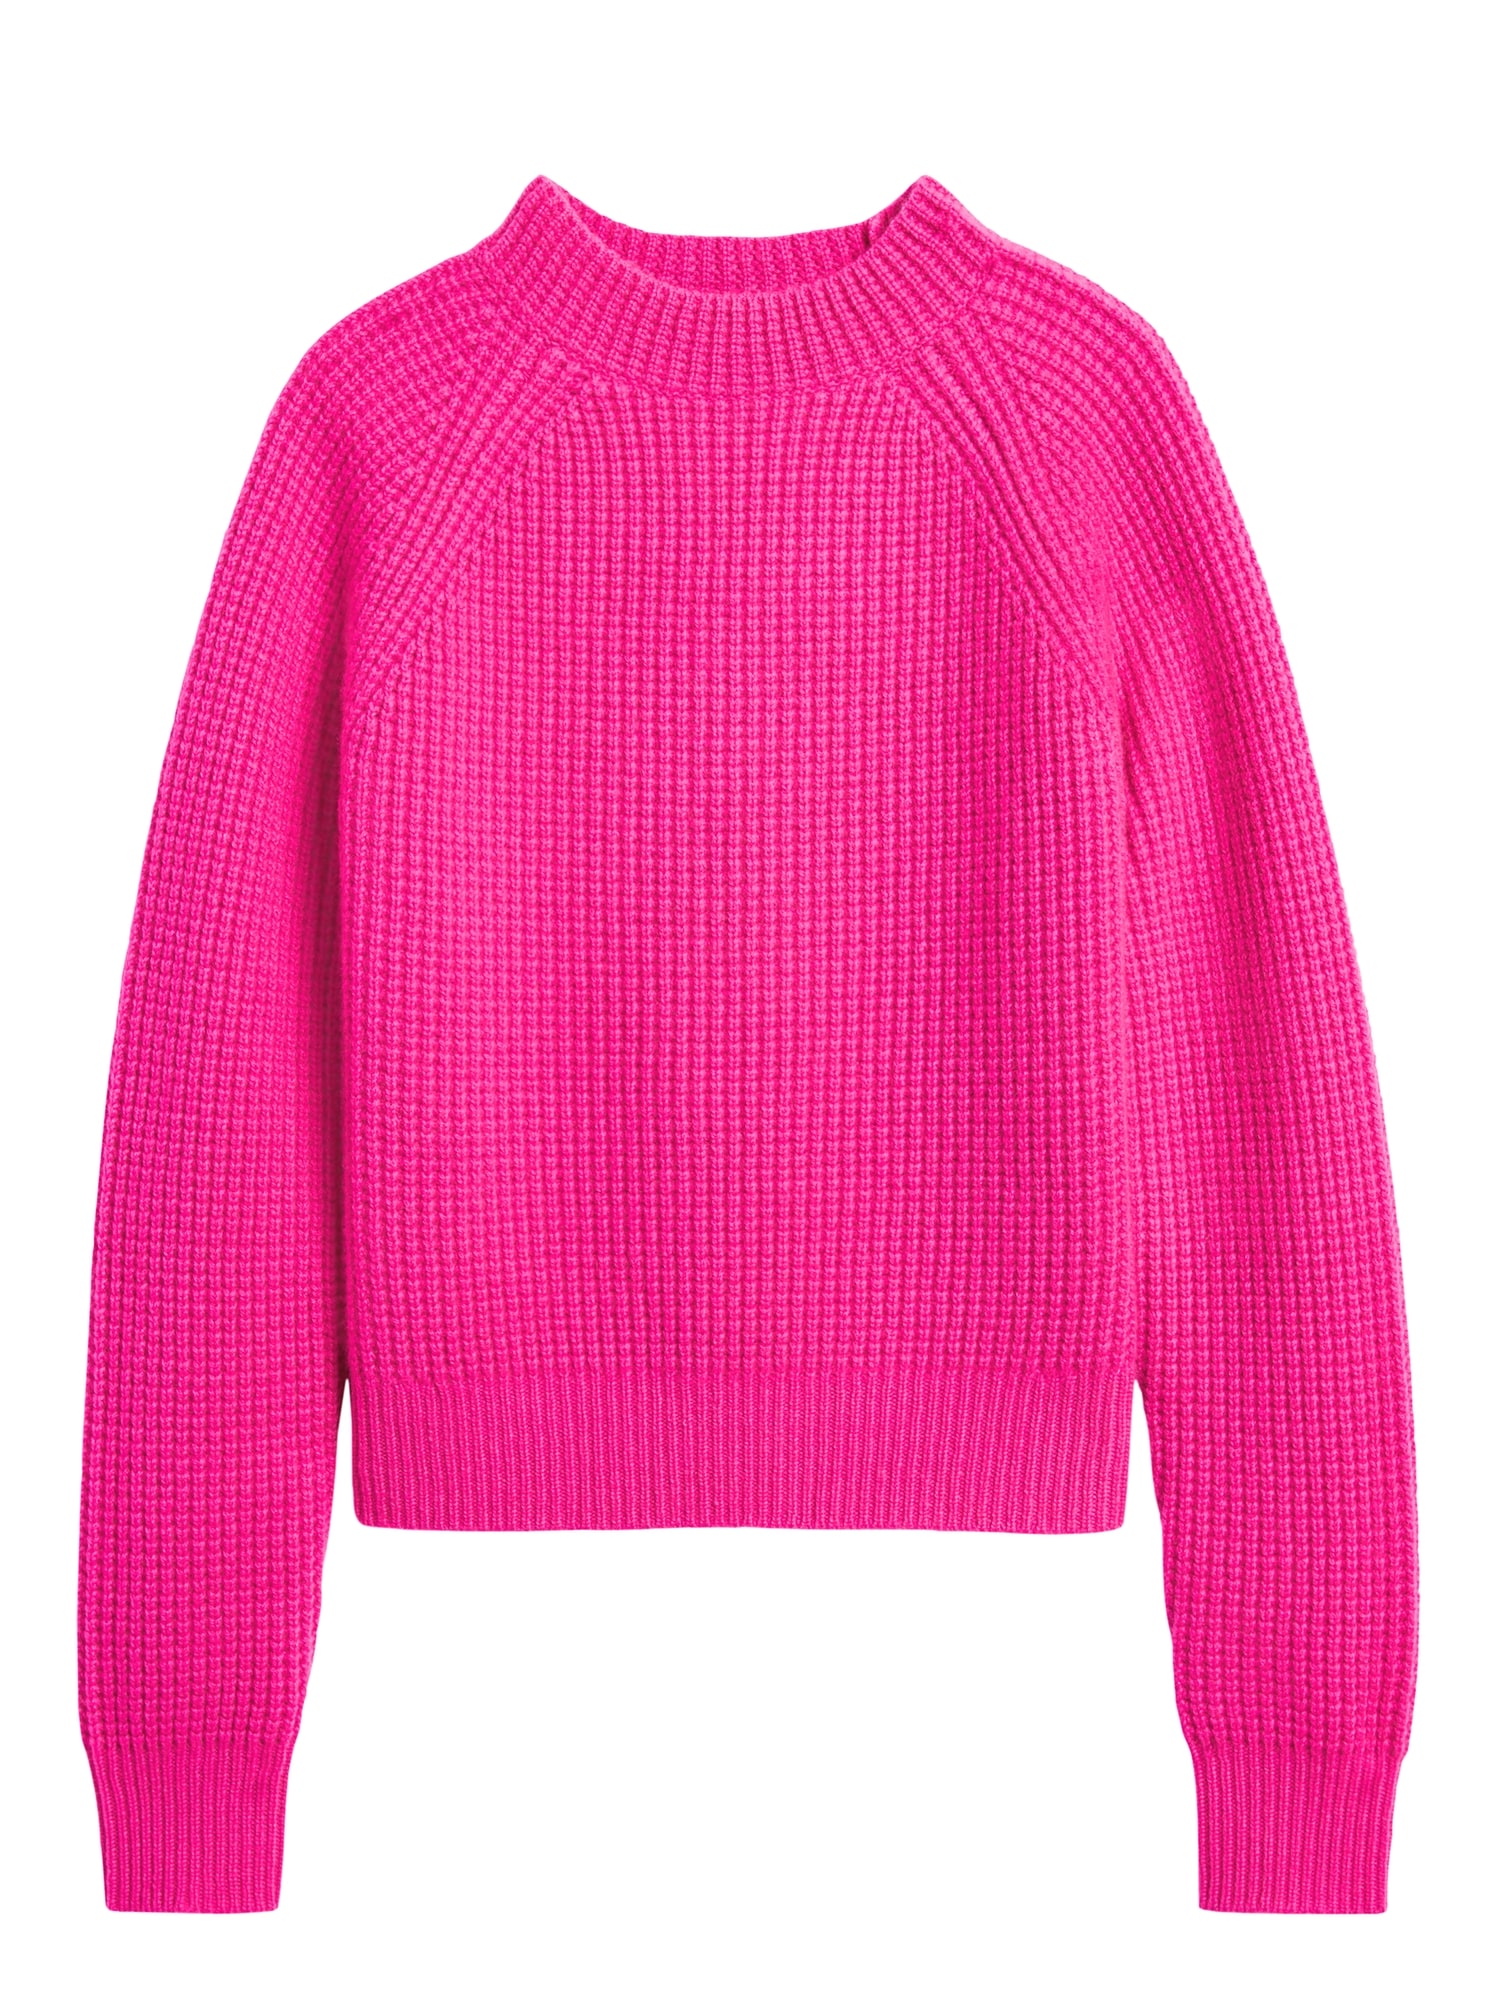 Cashmere Cropped Mock-Neck Sweater